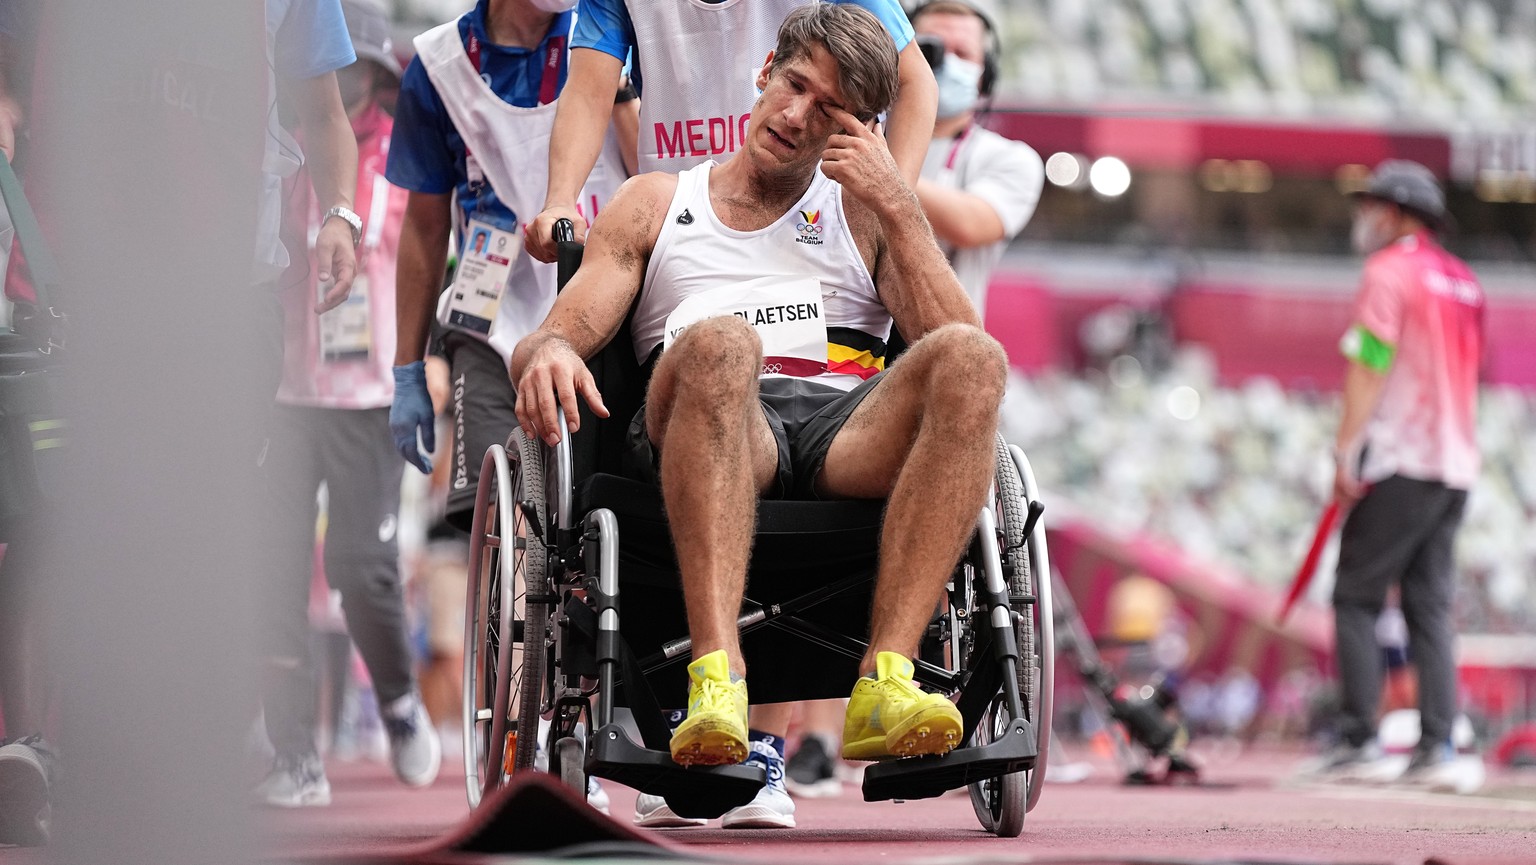 epa09392820 Thomas van der Plaetsen of Belgium is removed in a wheelchair following an attempt in the Long Jump of the Decathlon during the Athletics events of the Tokyo 2020 Olympic Games at the Olym ...